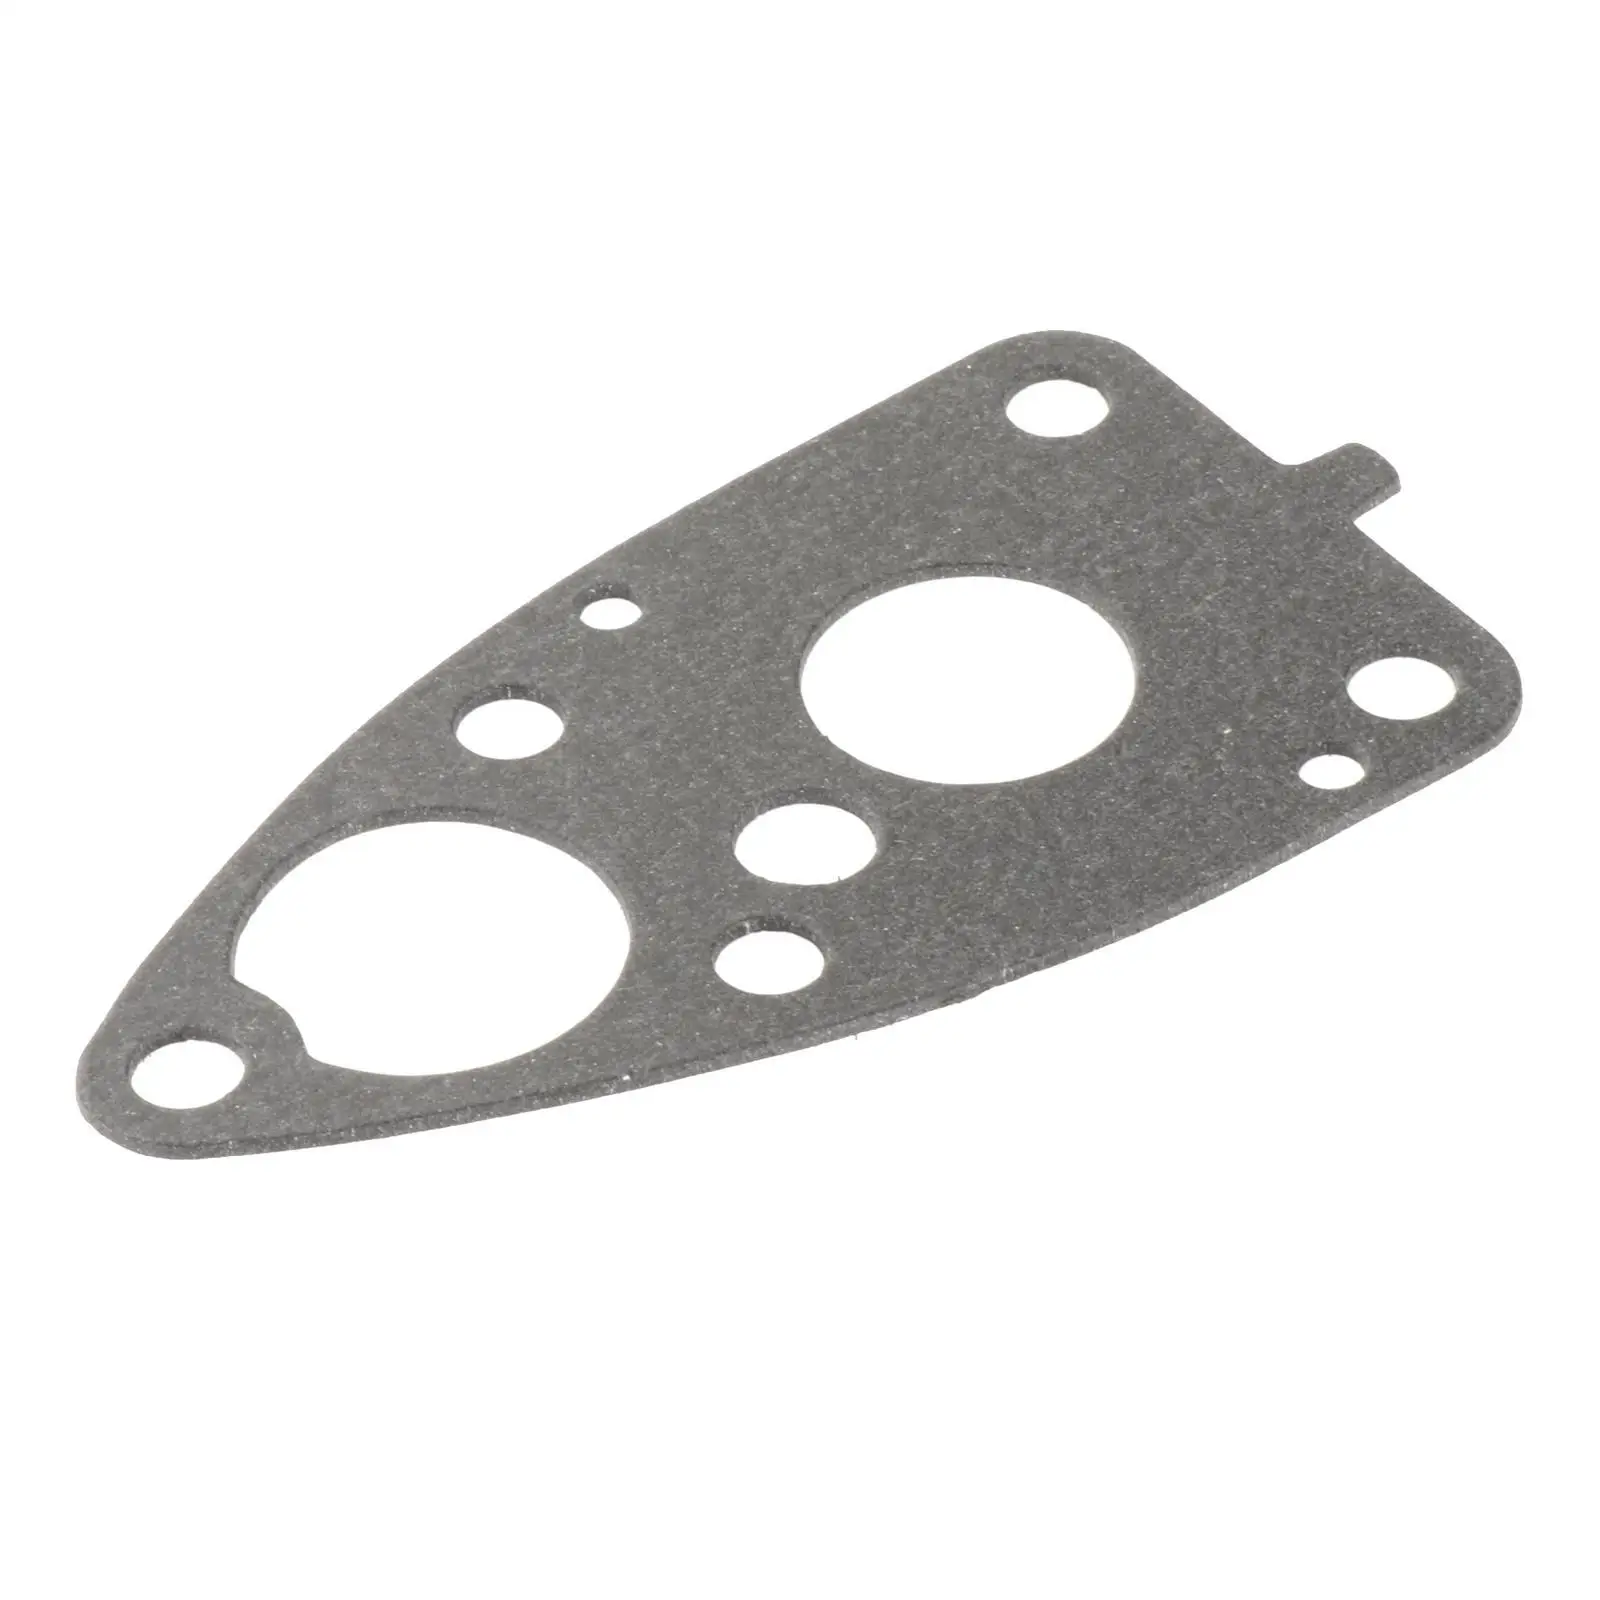 Packing Lower Case, Silver Parts Accessories Water Pump Plate Fits for Yamaha F4A 4A 4B 5C 6E0-45315-A0-00 Outboard Engine